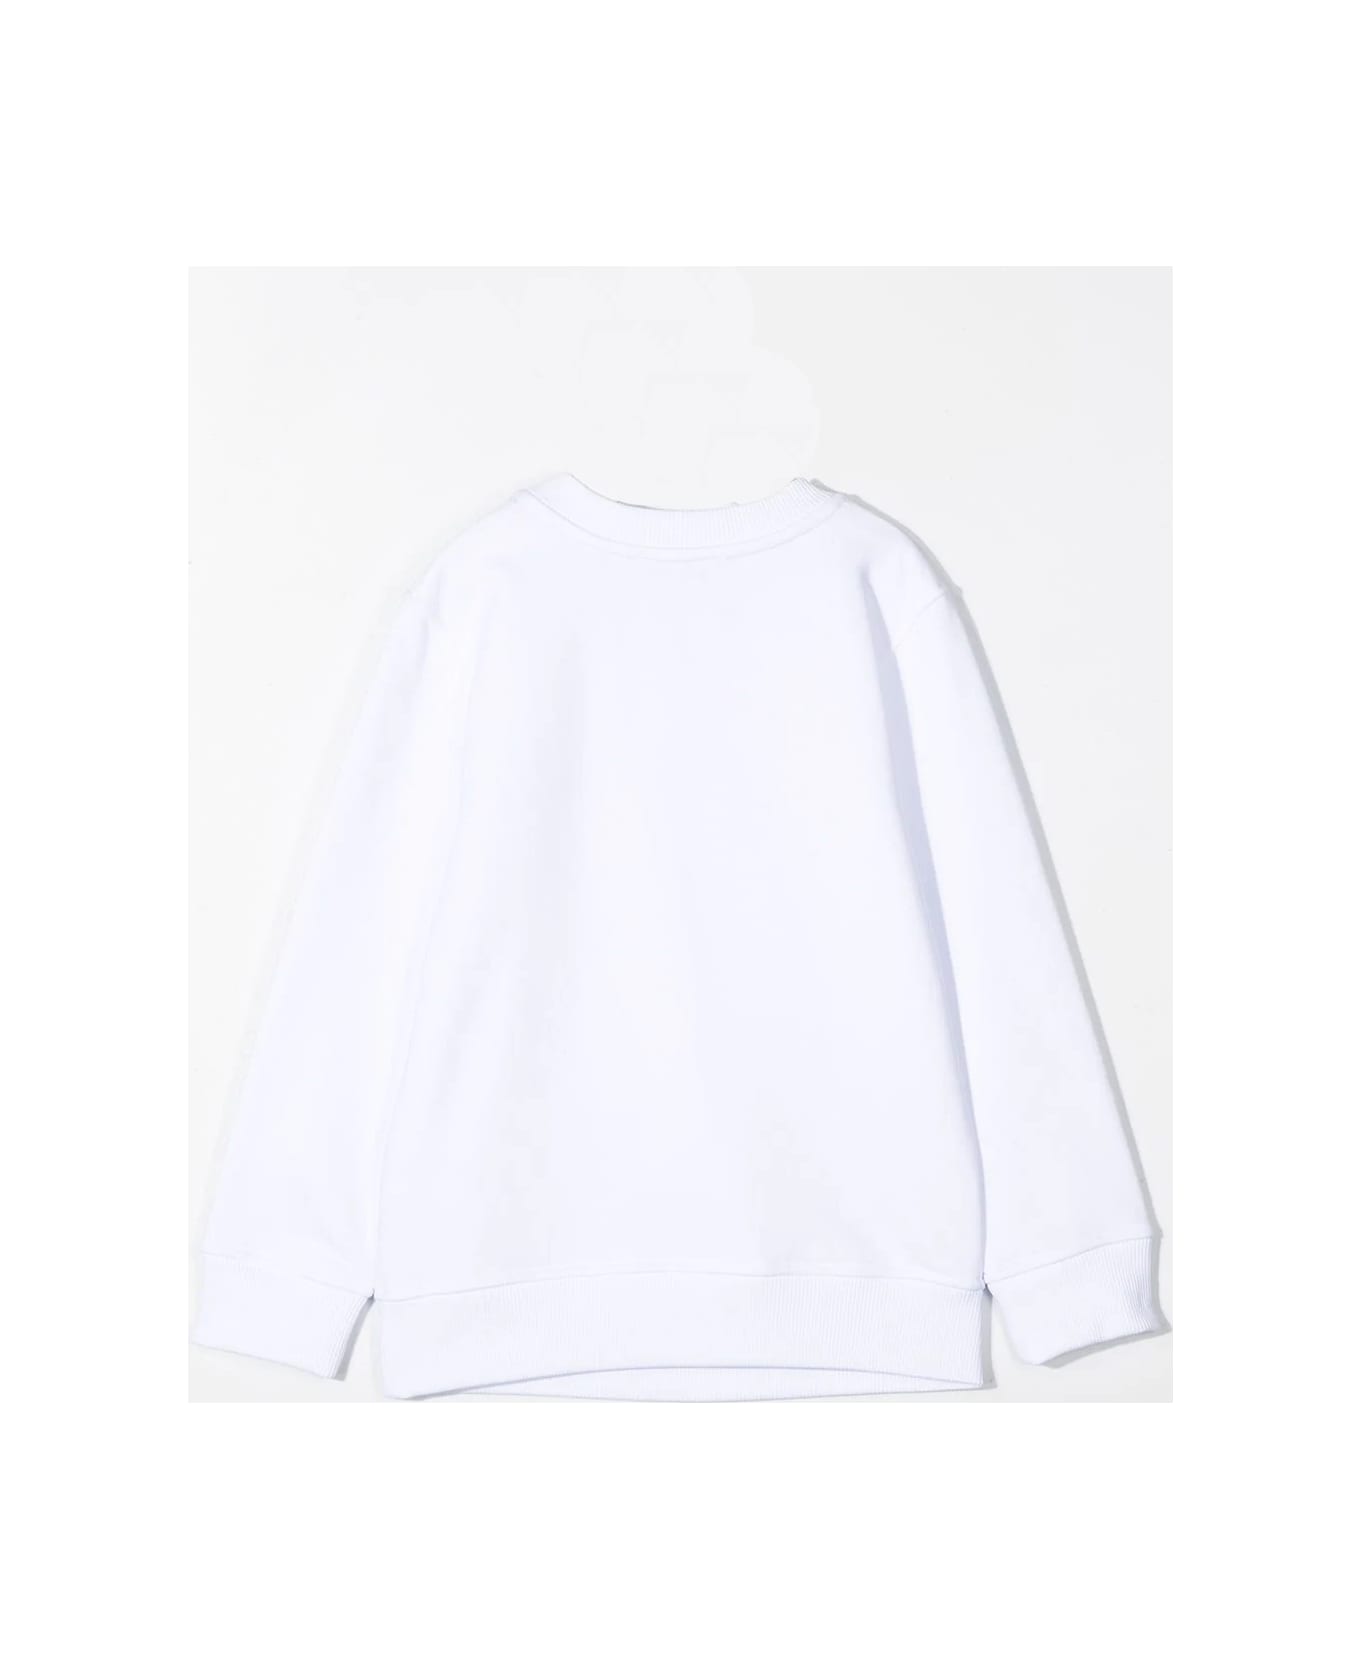 Givenchy Sweatshirt With Application - White